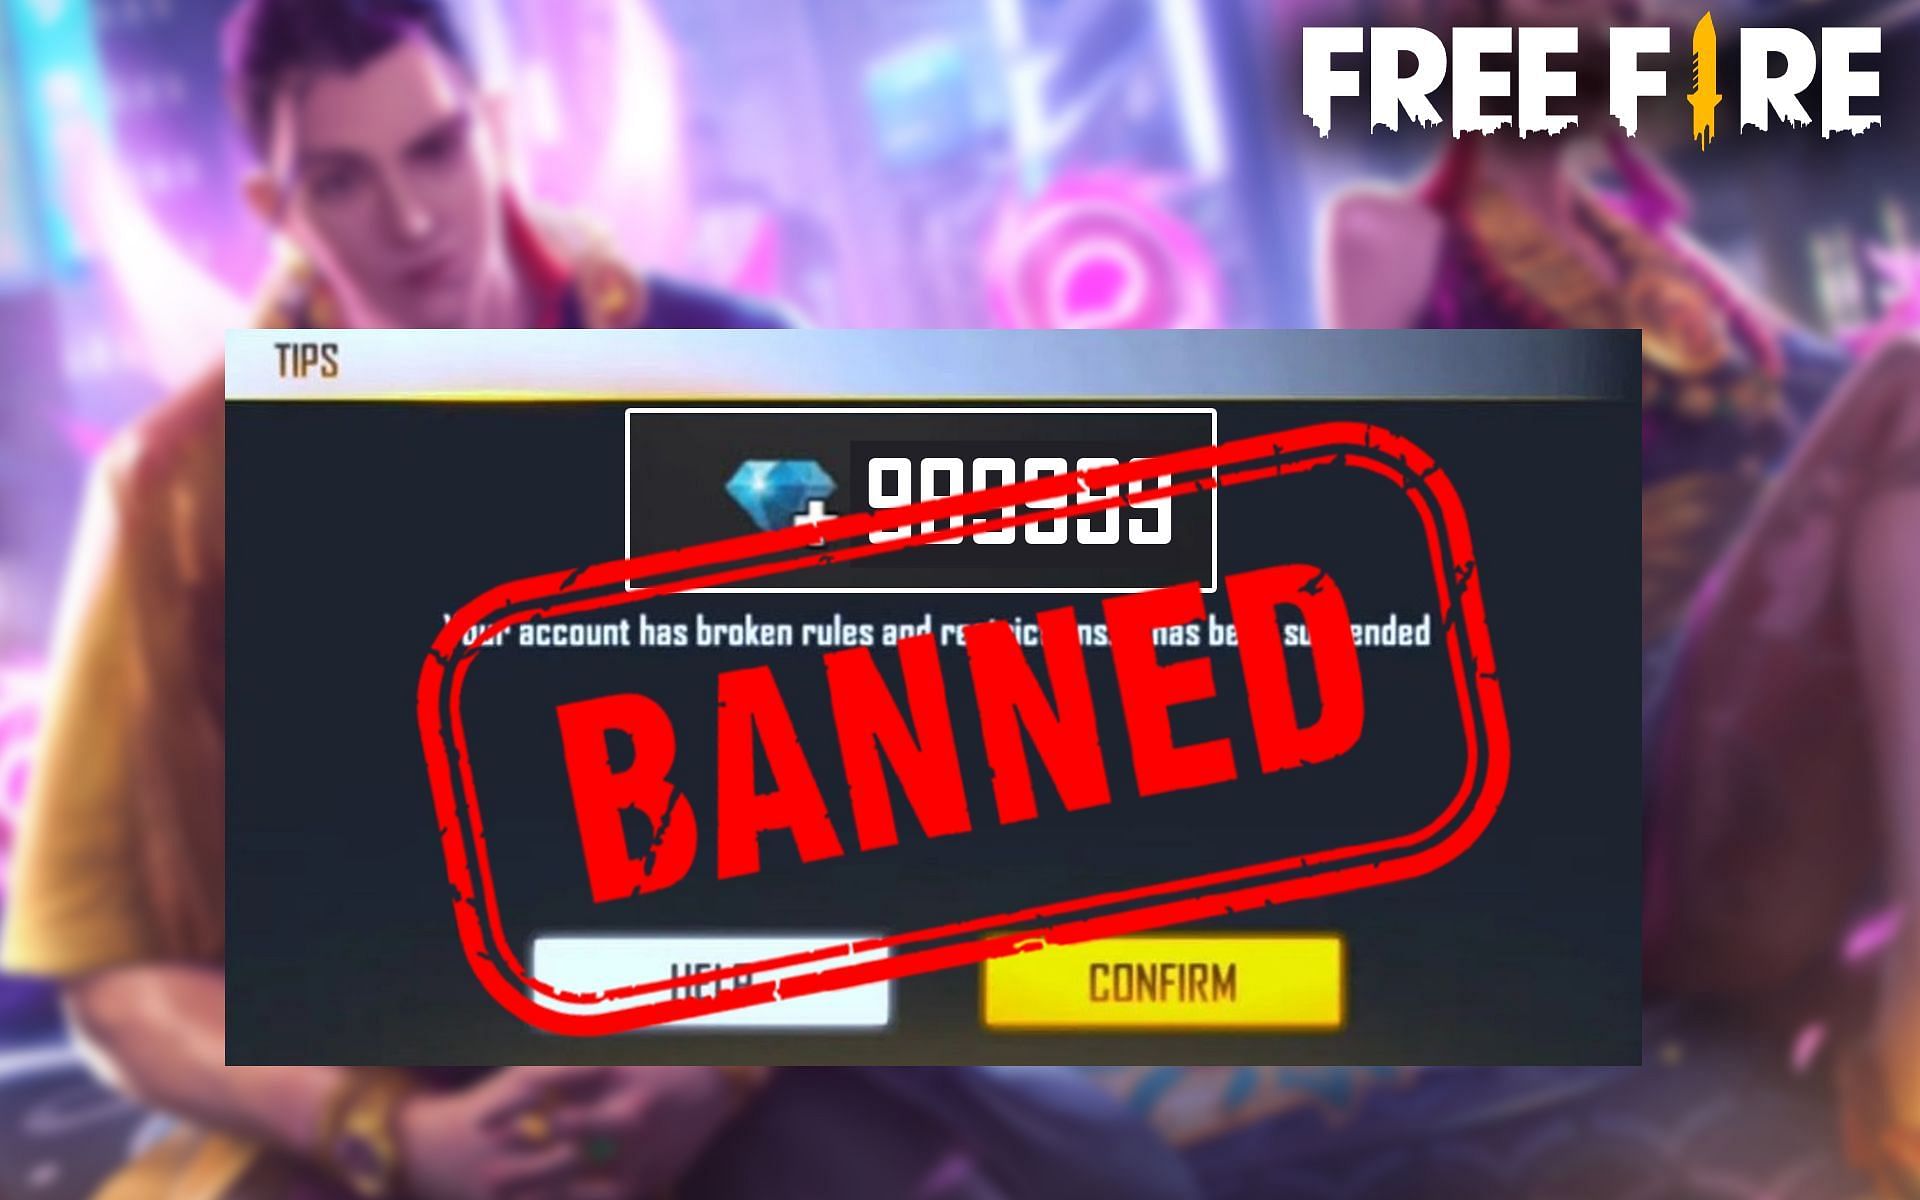 Diamond hacks or other mods should not be used by players in Free Fire (Image via Sportskeeda)